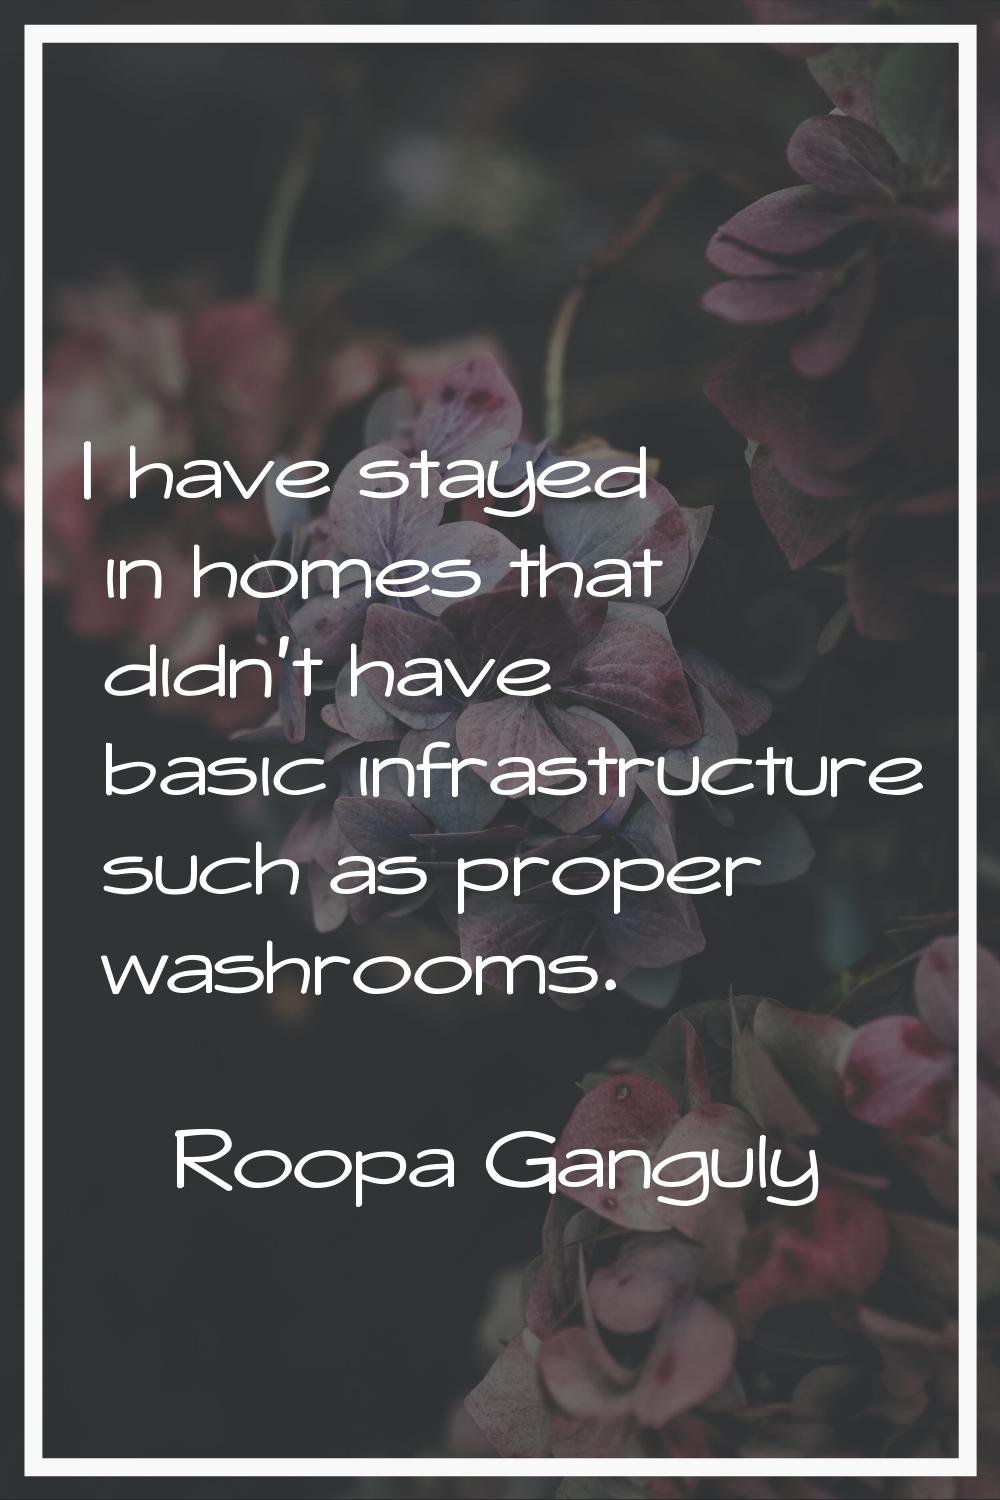 I have stayed in homes that didn't have basic infrastructure such as proper washrooms.